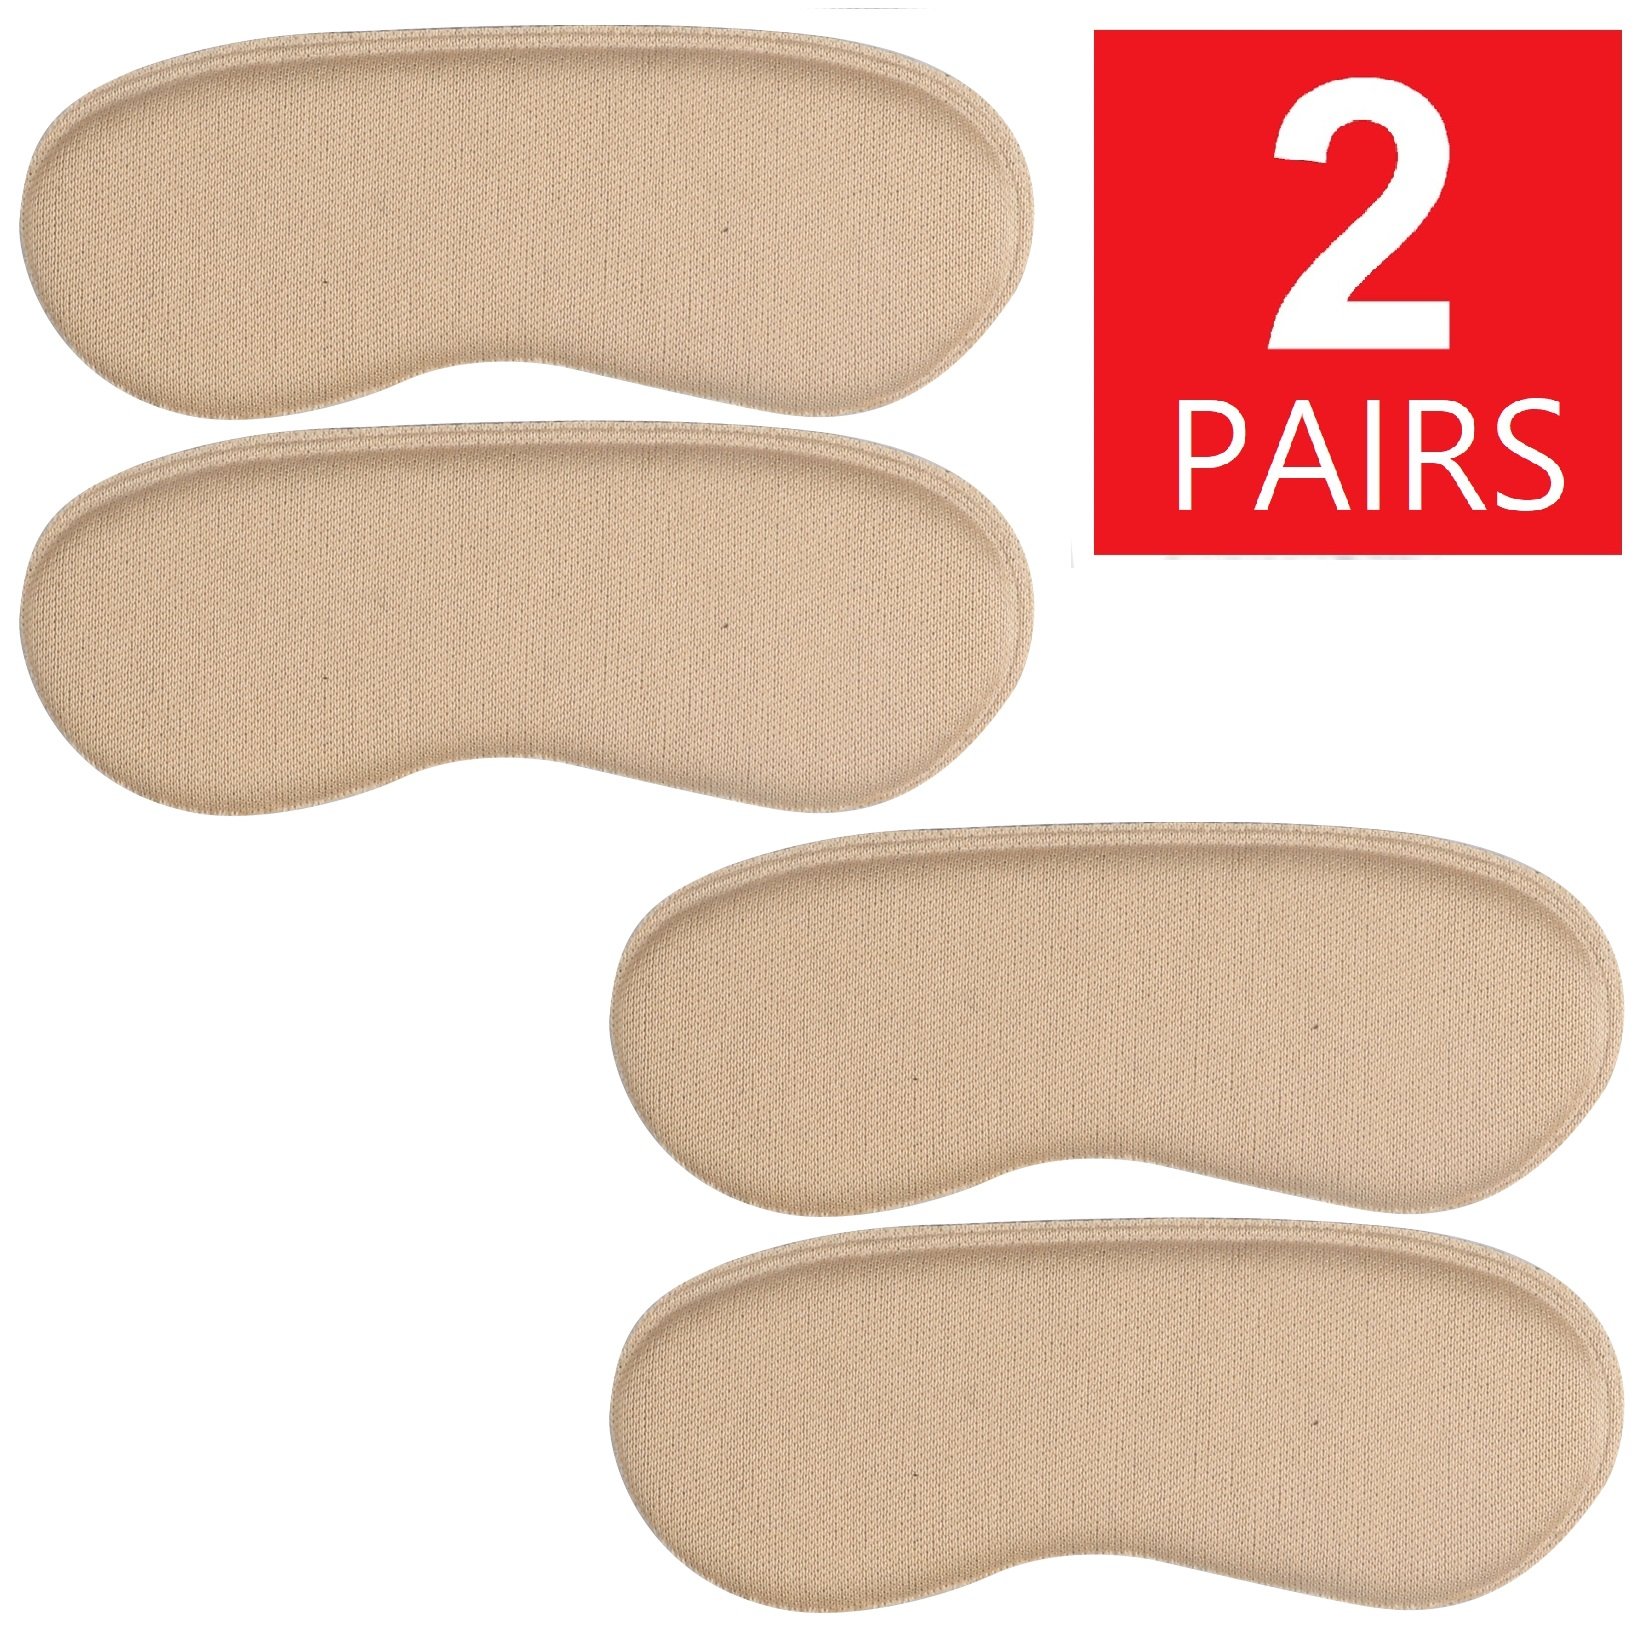 LOT 1 2 3 Pairs Fabric Shoe Pads Cushion Liner Grip Back Heel Inserts Insoles 